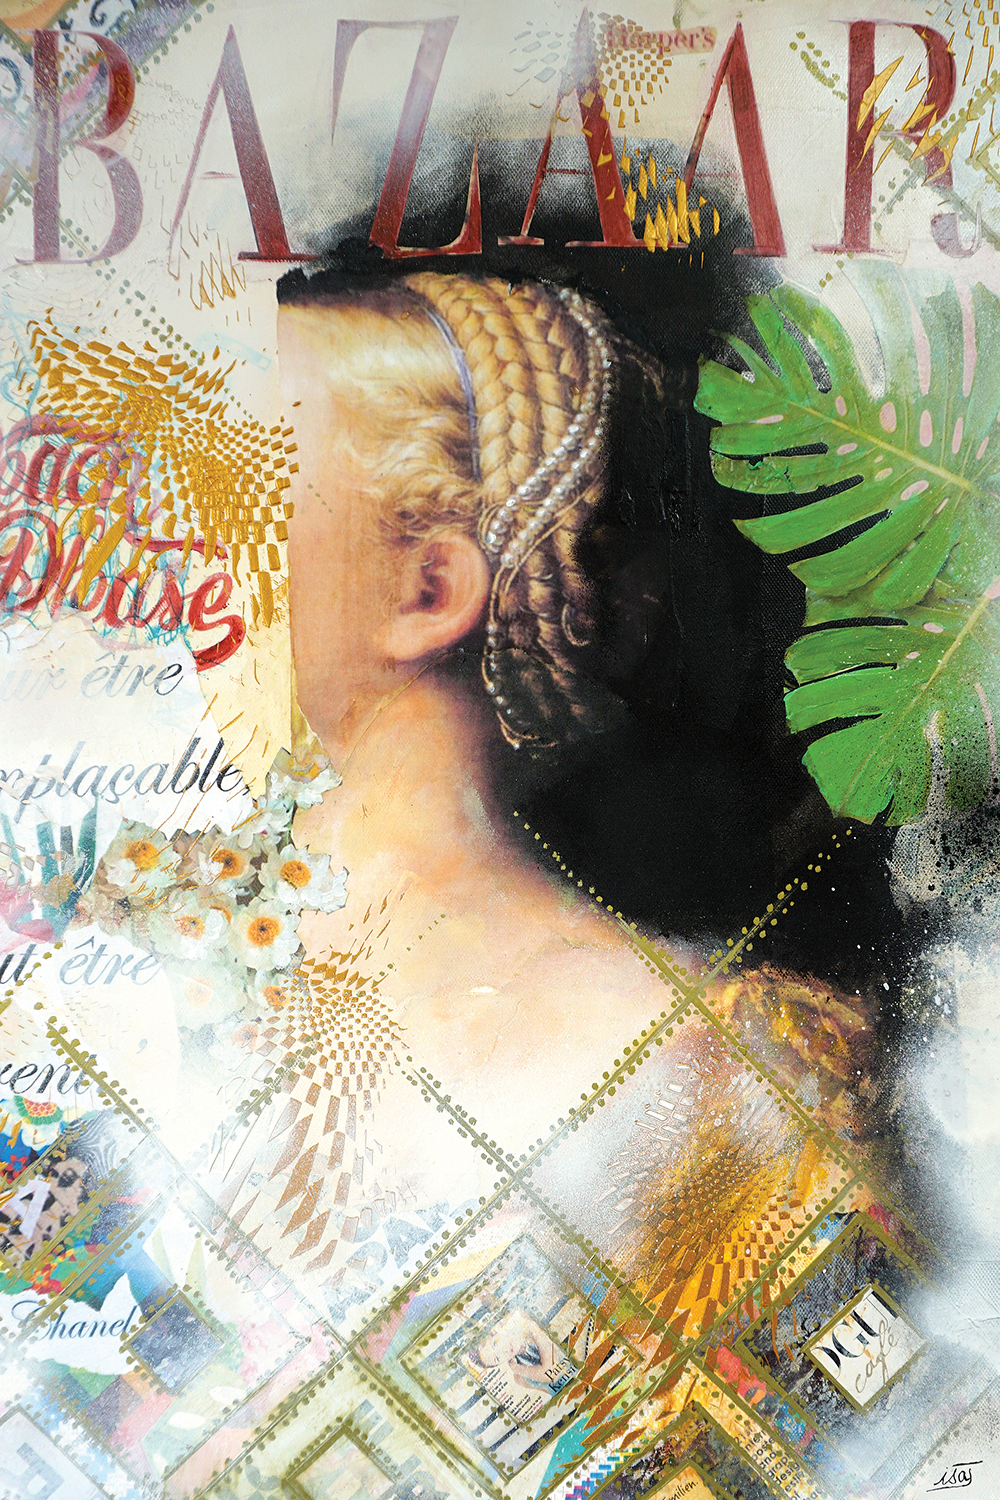 woman with braids and pearls in hair looking away with face obscured with remnants of other images, a leaf, and "bazaar"